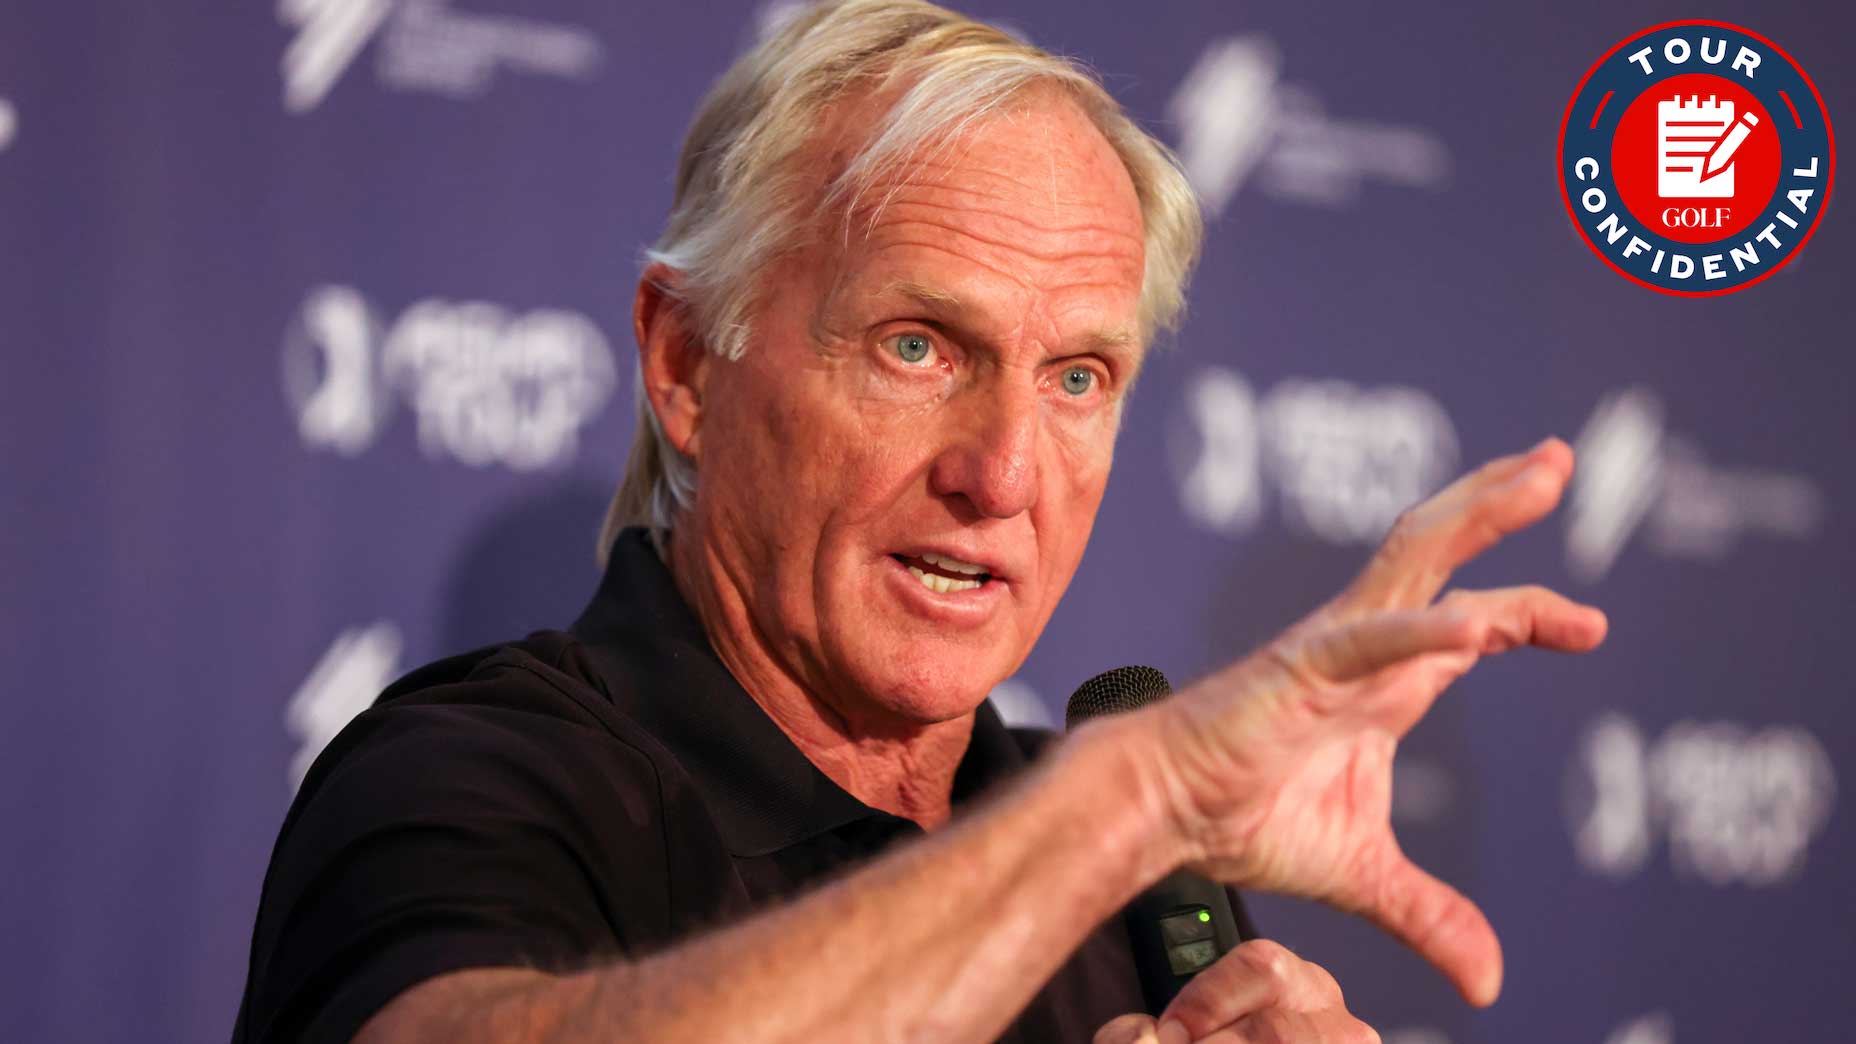 Greg Norman was in the public eye this week giving interviews about the latest developments at LIV Golf.